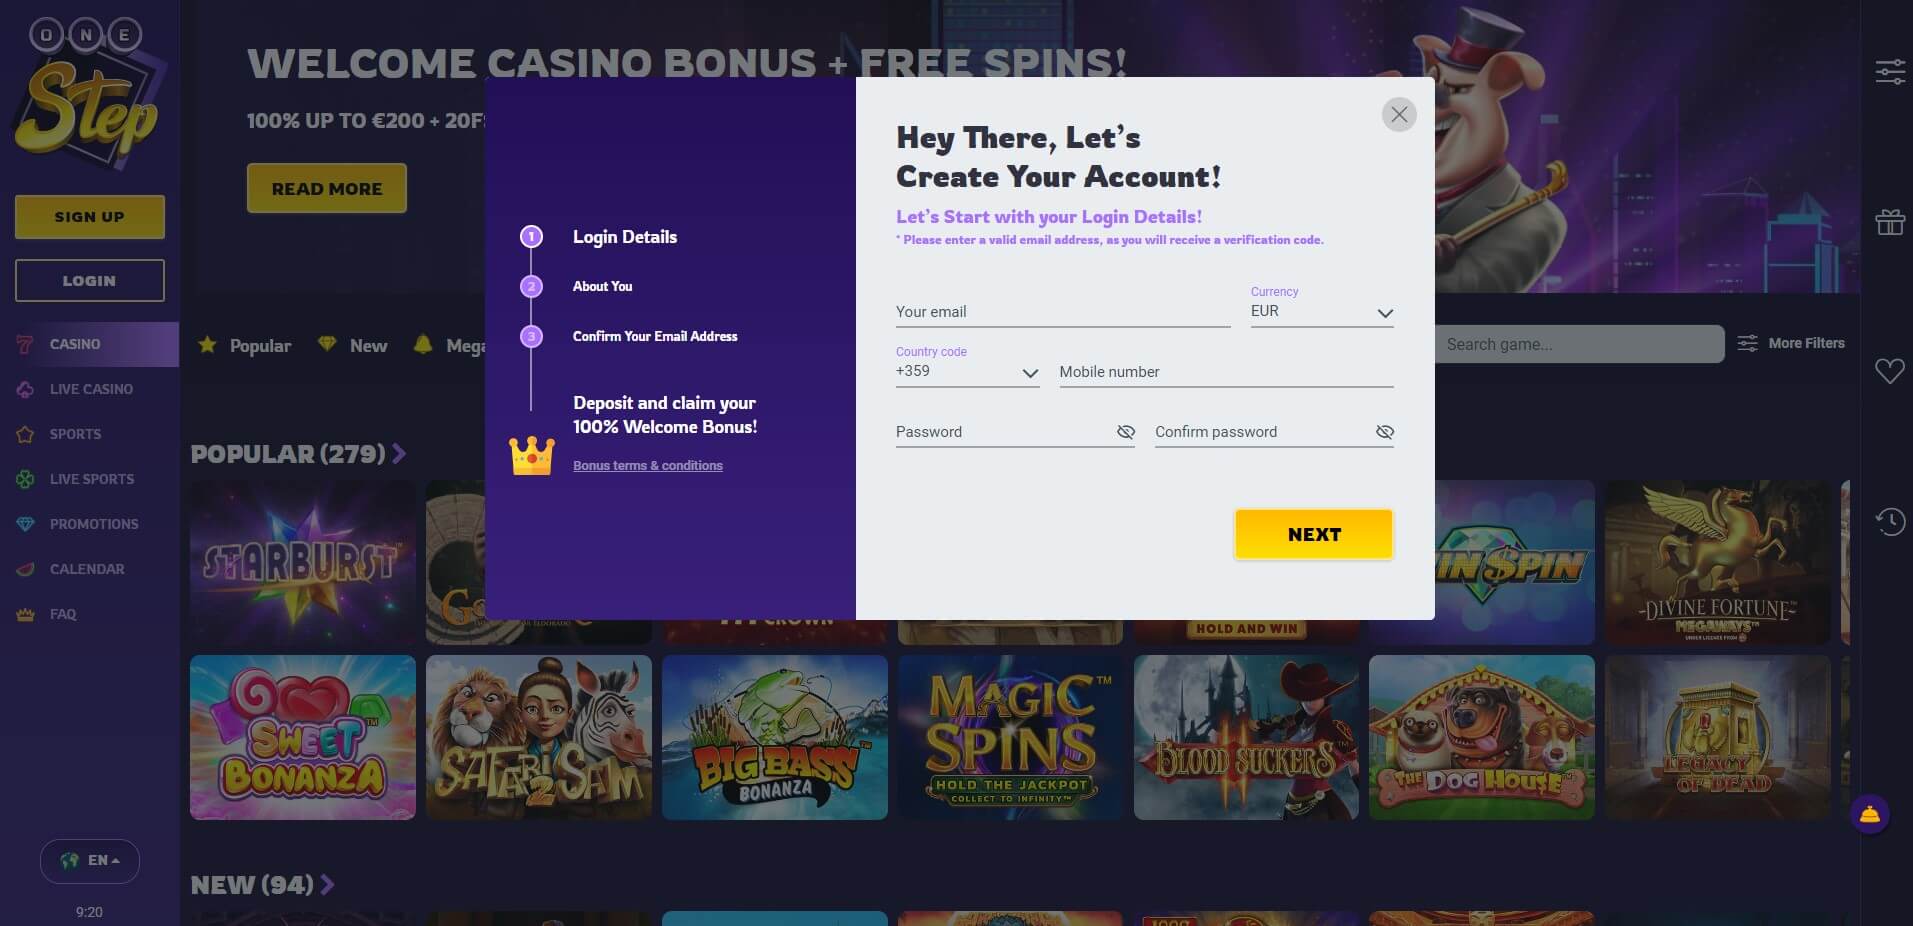 SignUp at OneStep Casino